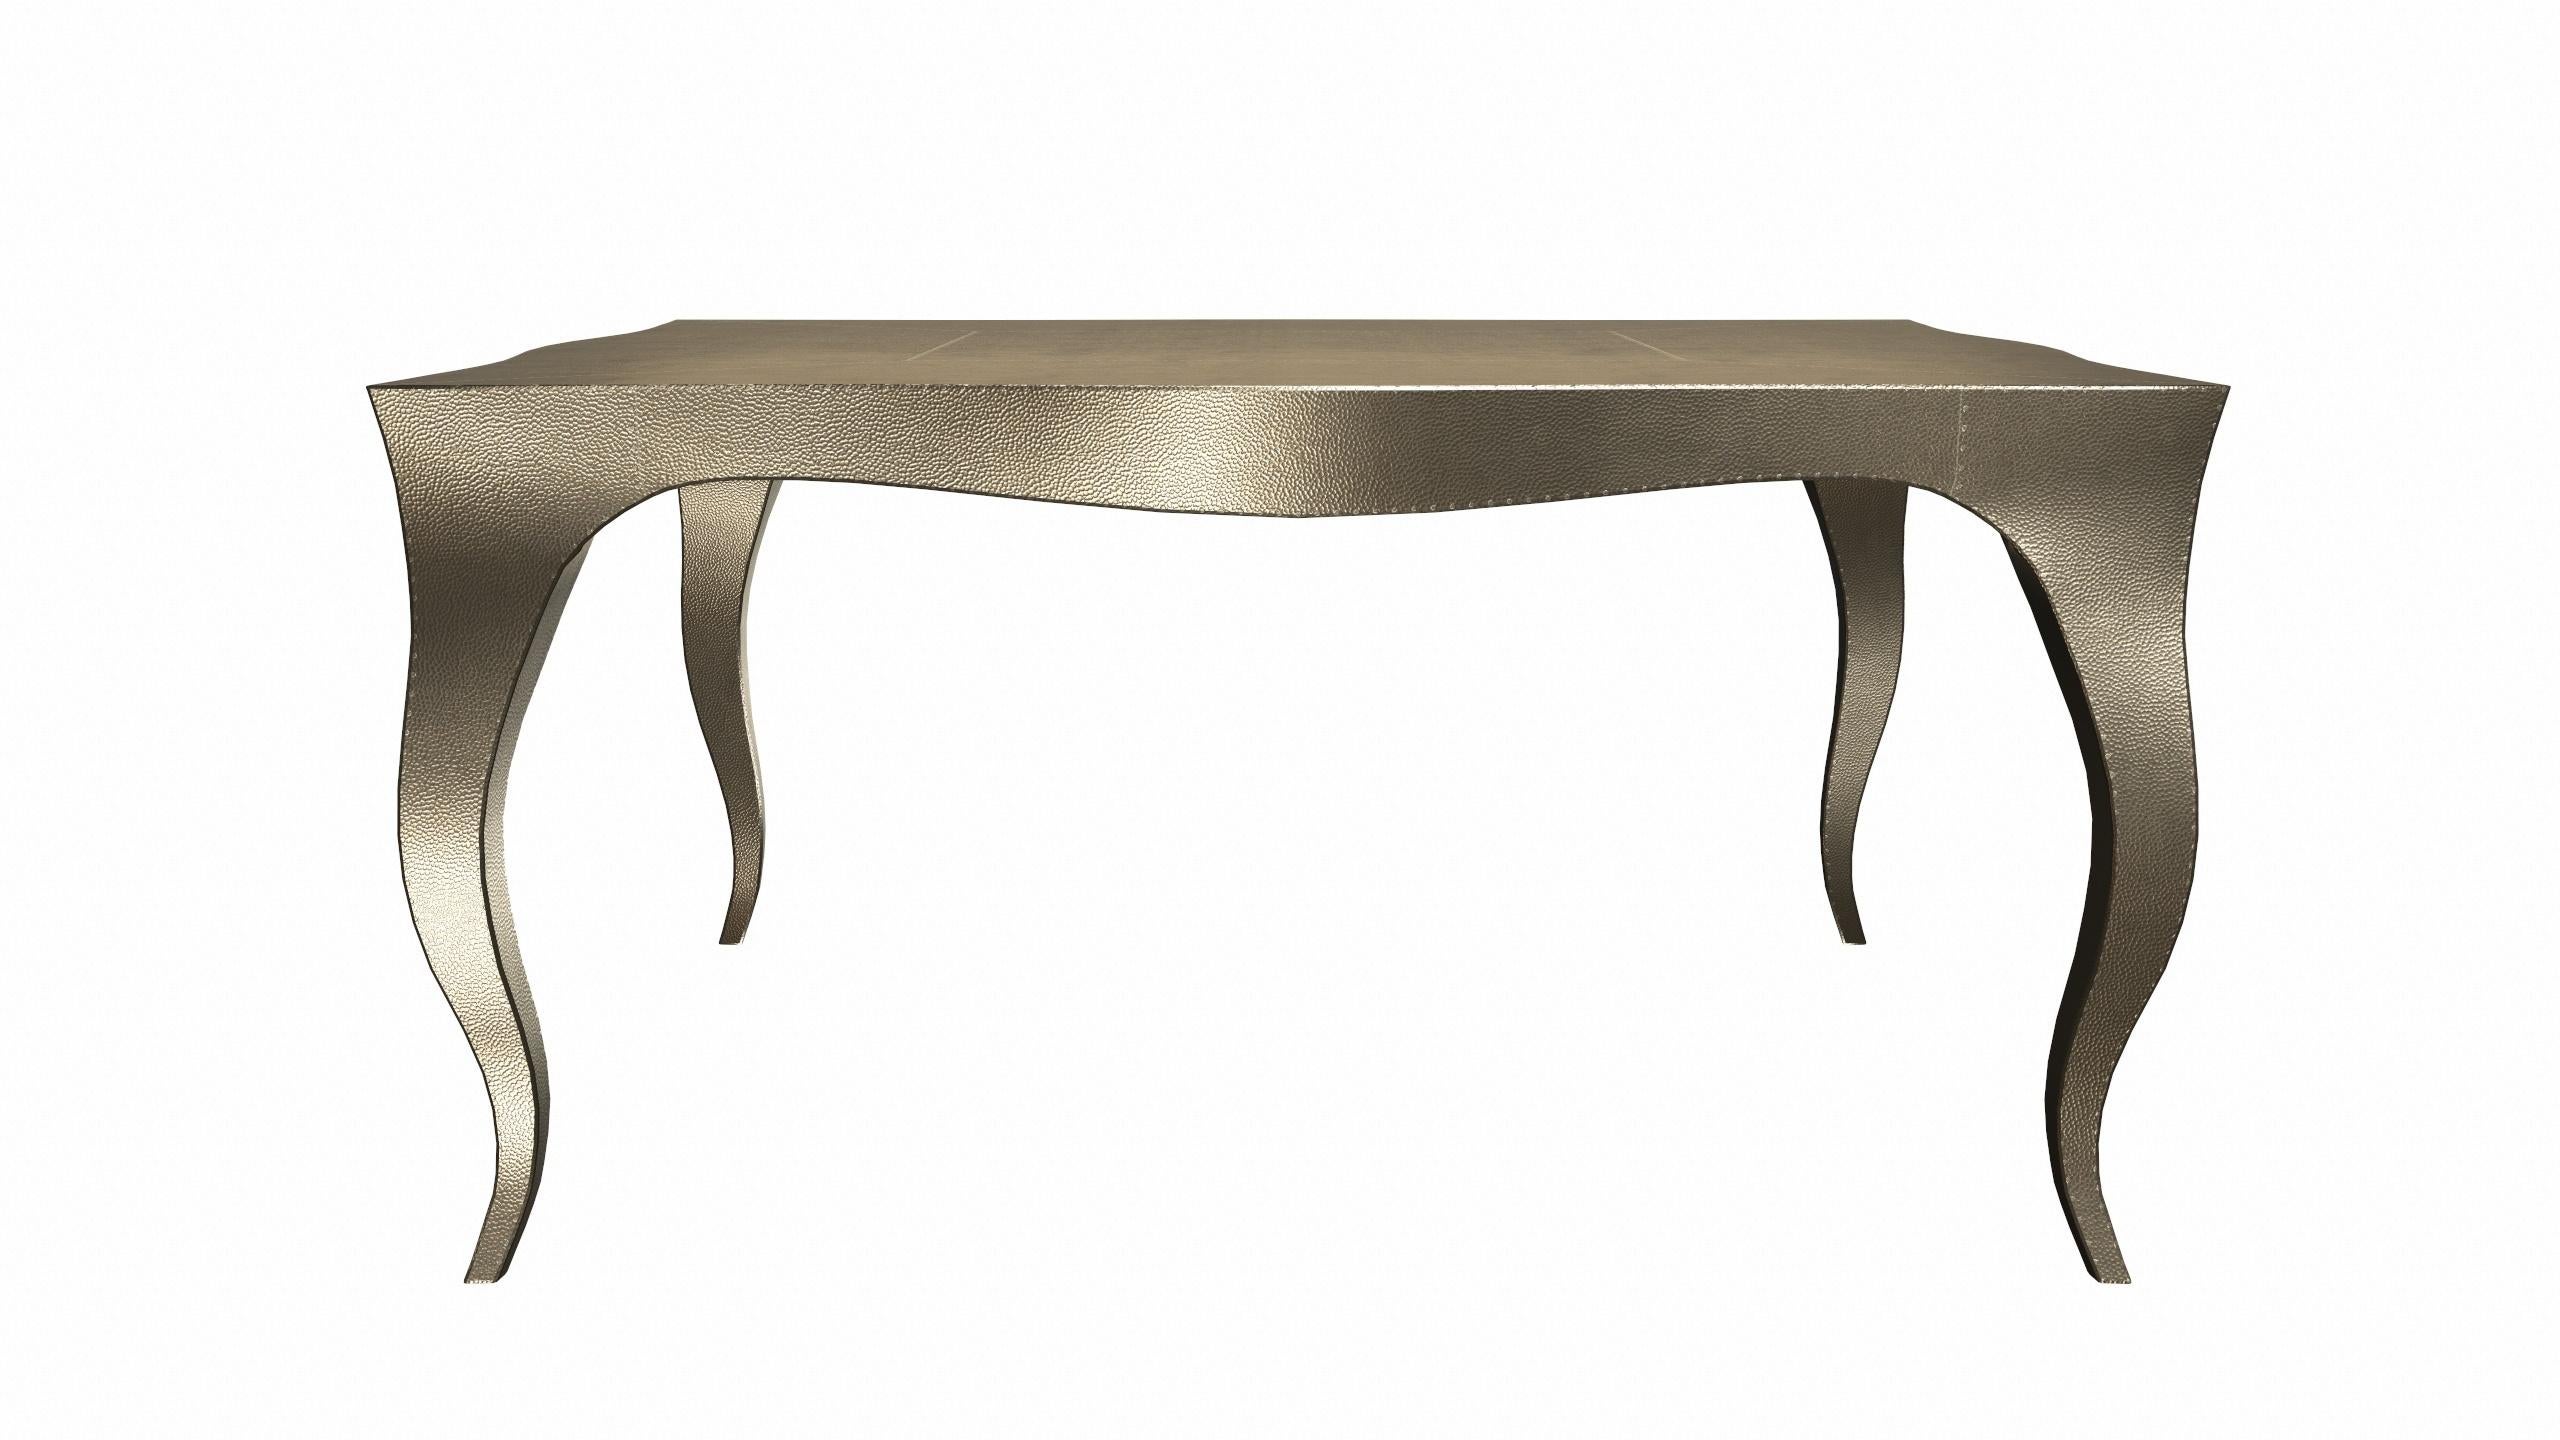 Louise Art Deco Industrial and Work Tables Mid. Hammered Brass by Paul Mathieu For Sale 1